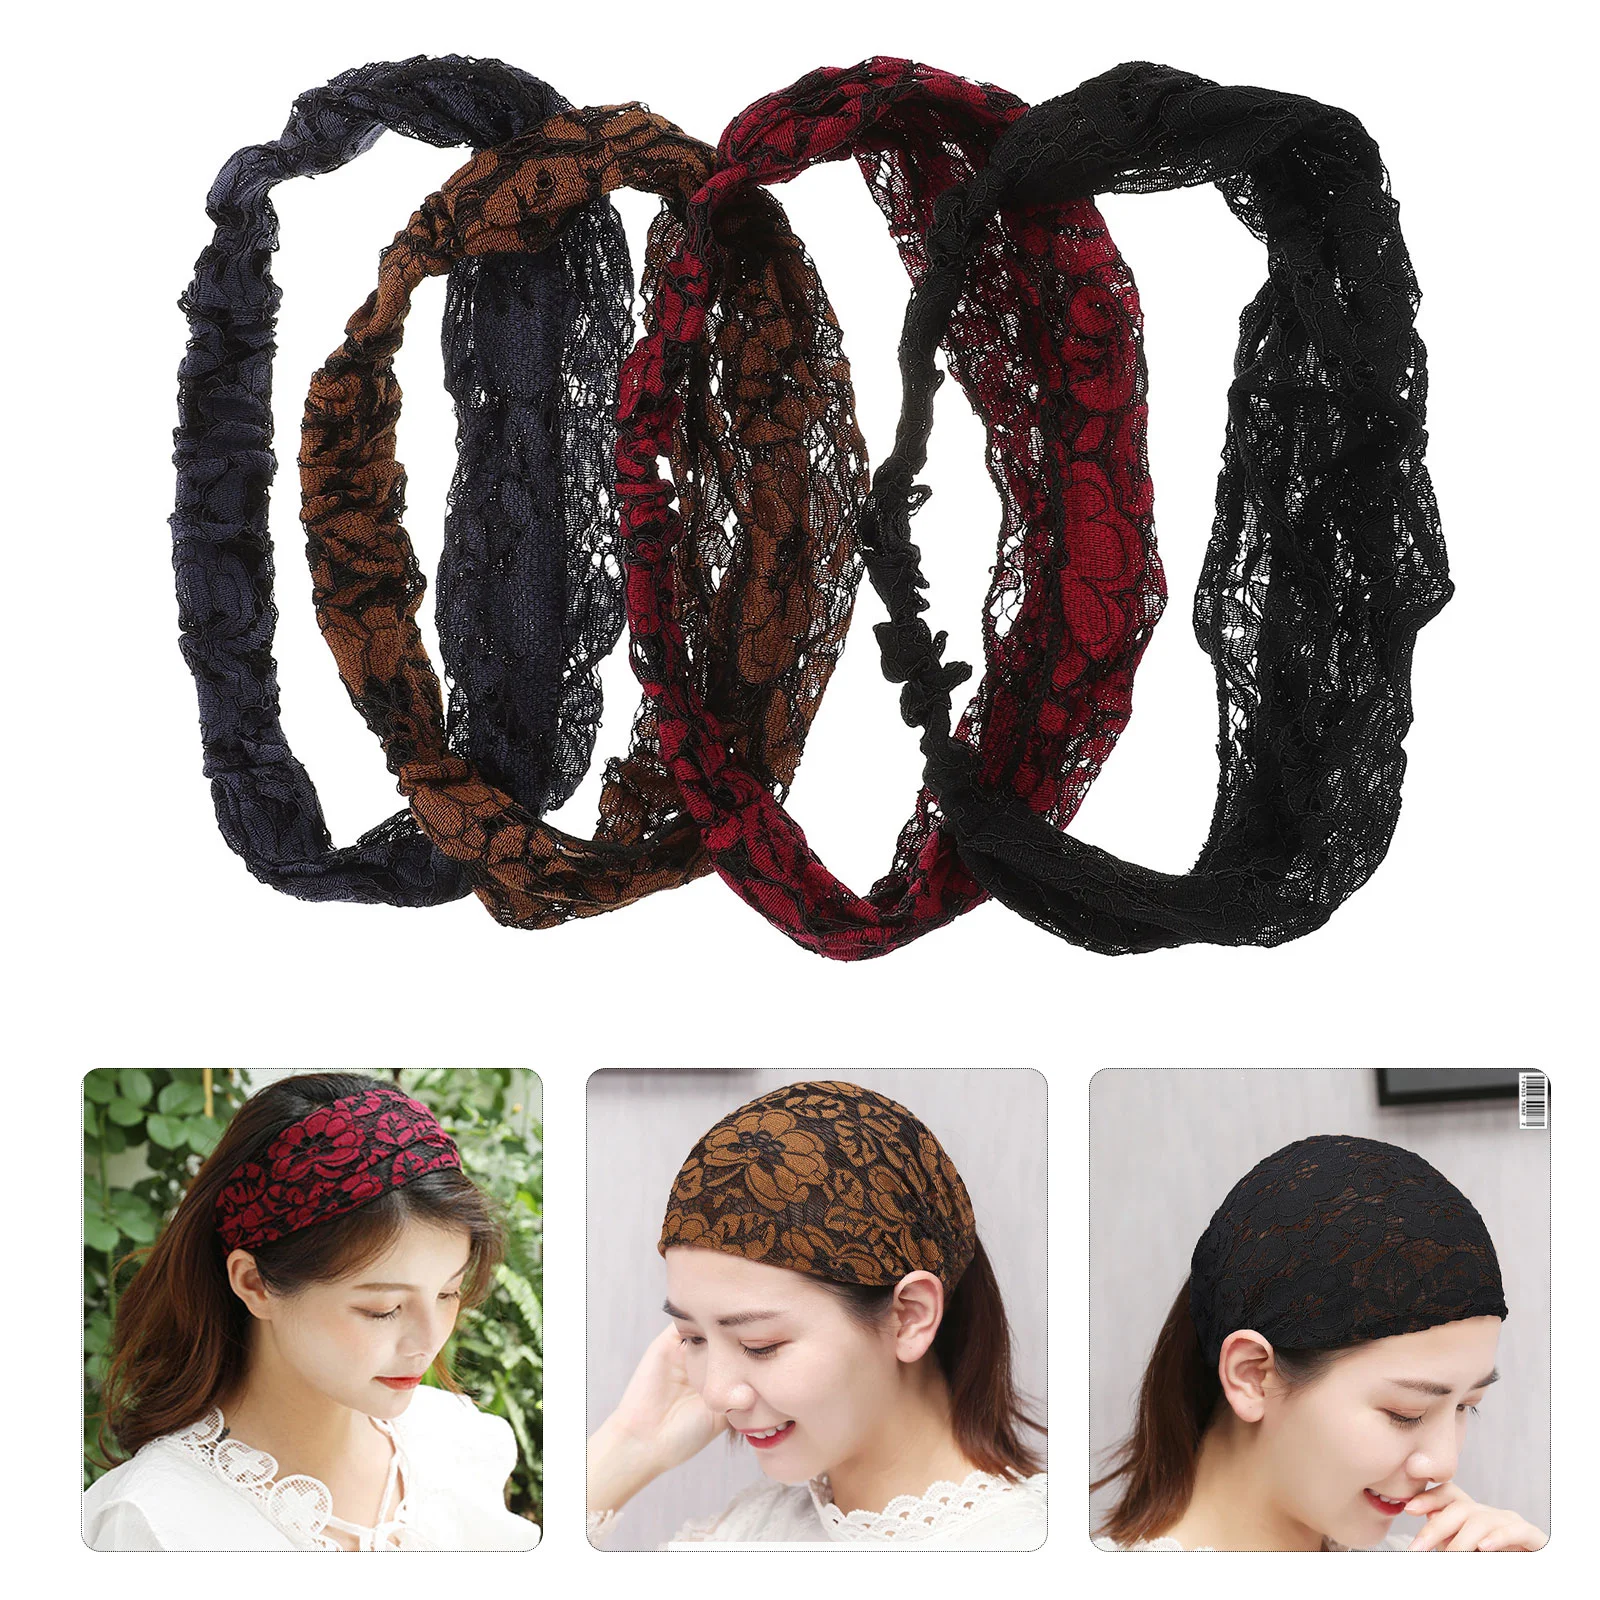 4 pcs Stretchy Lace Hair Tie Elastic Lace Headband Women Lace Headband for Girl